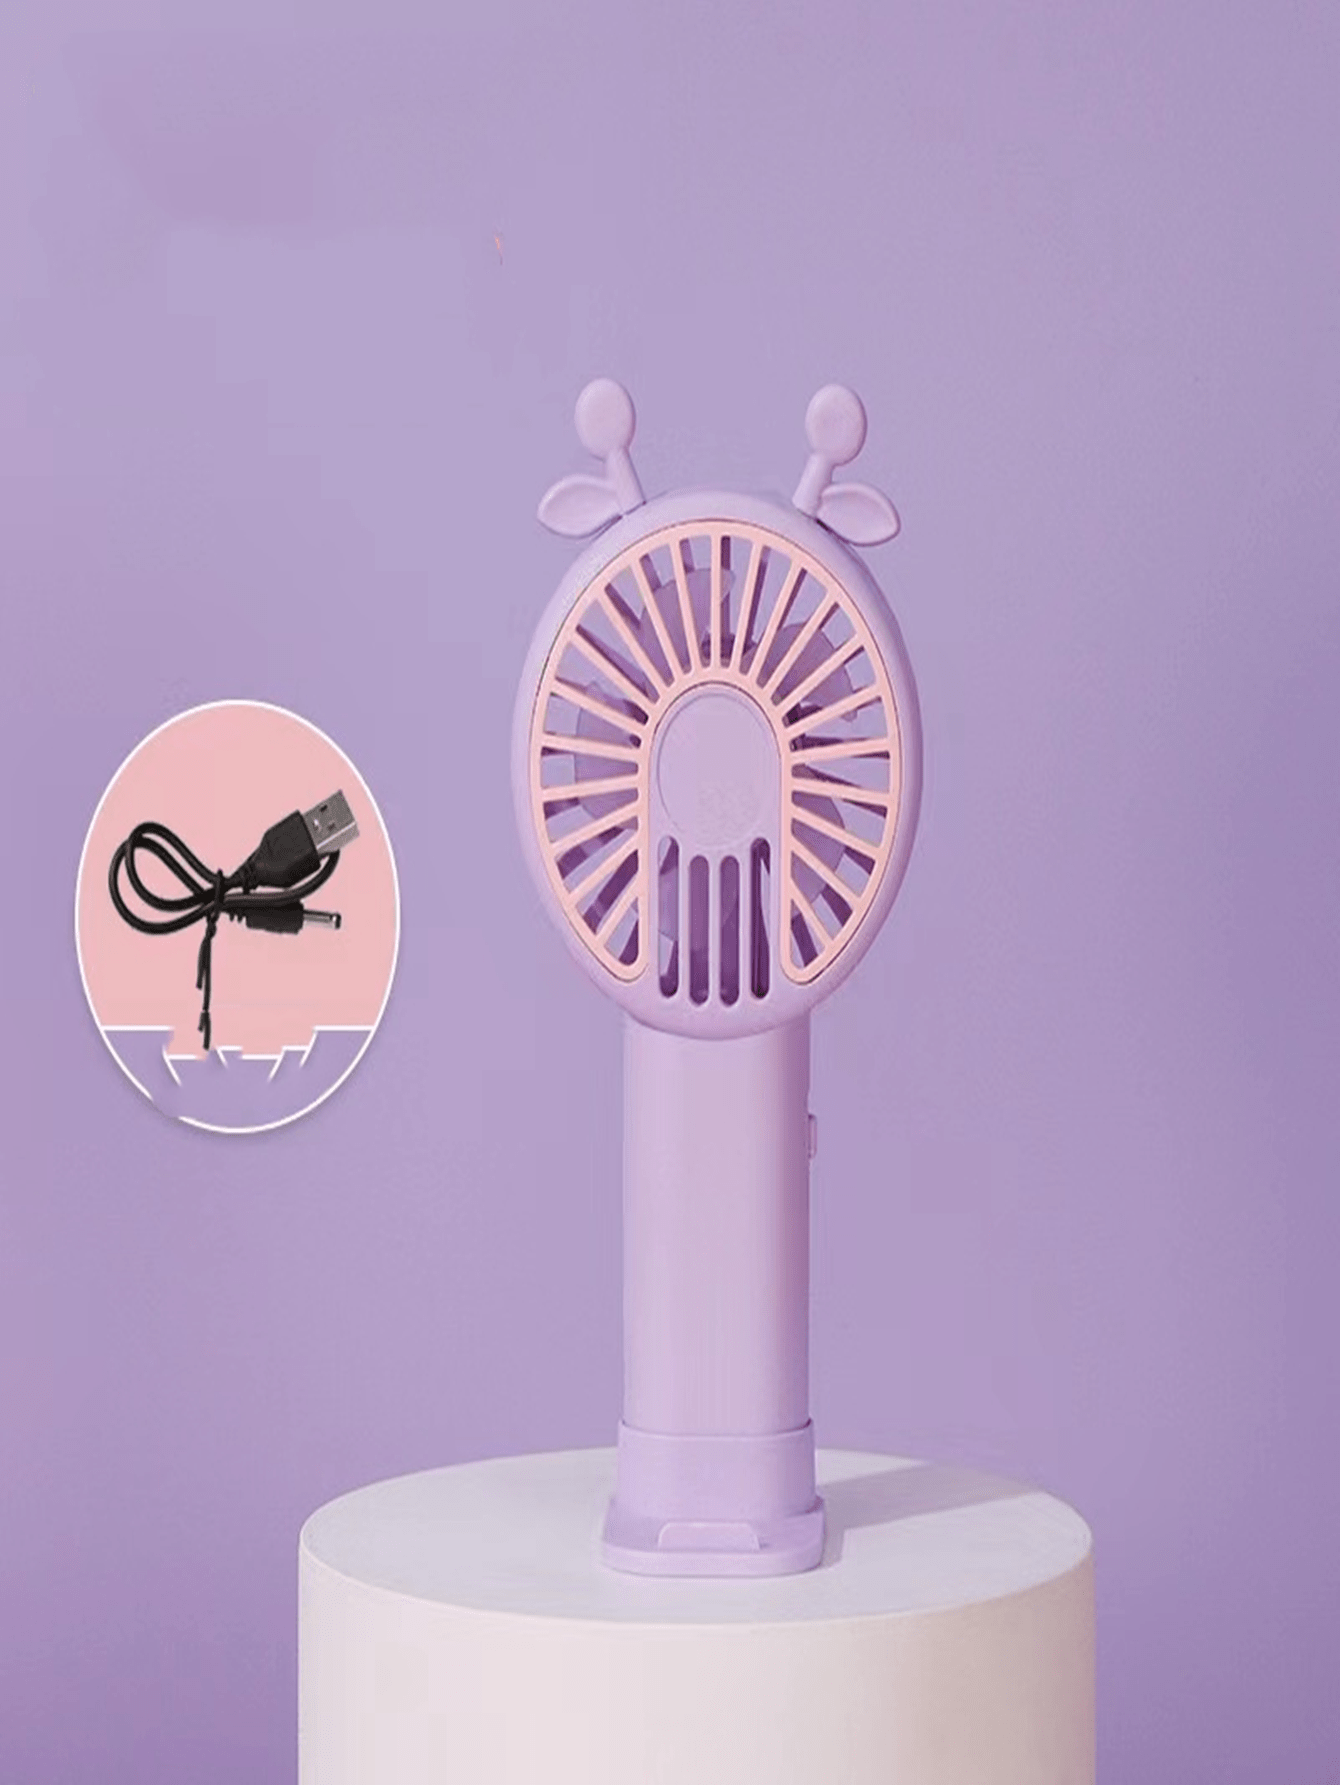 Portable Handheld Electric Fan With High Wind Power For Carrying, Recharging, Camping, Manual Operation, Low Noise-Purple-4